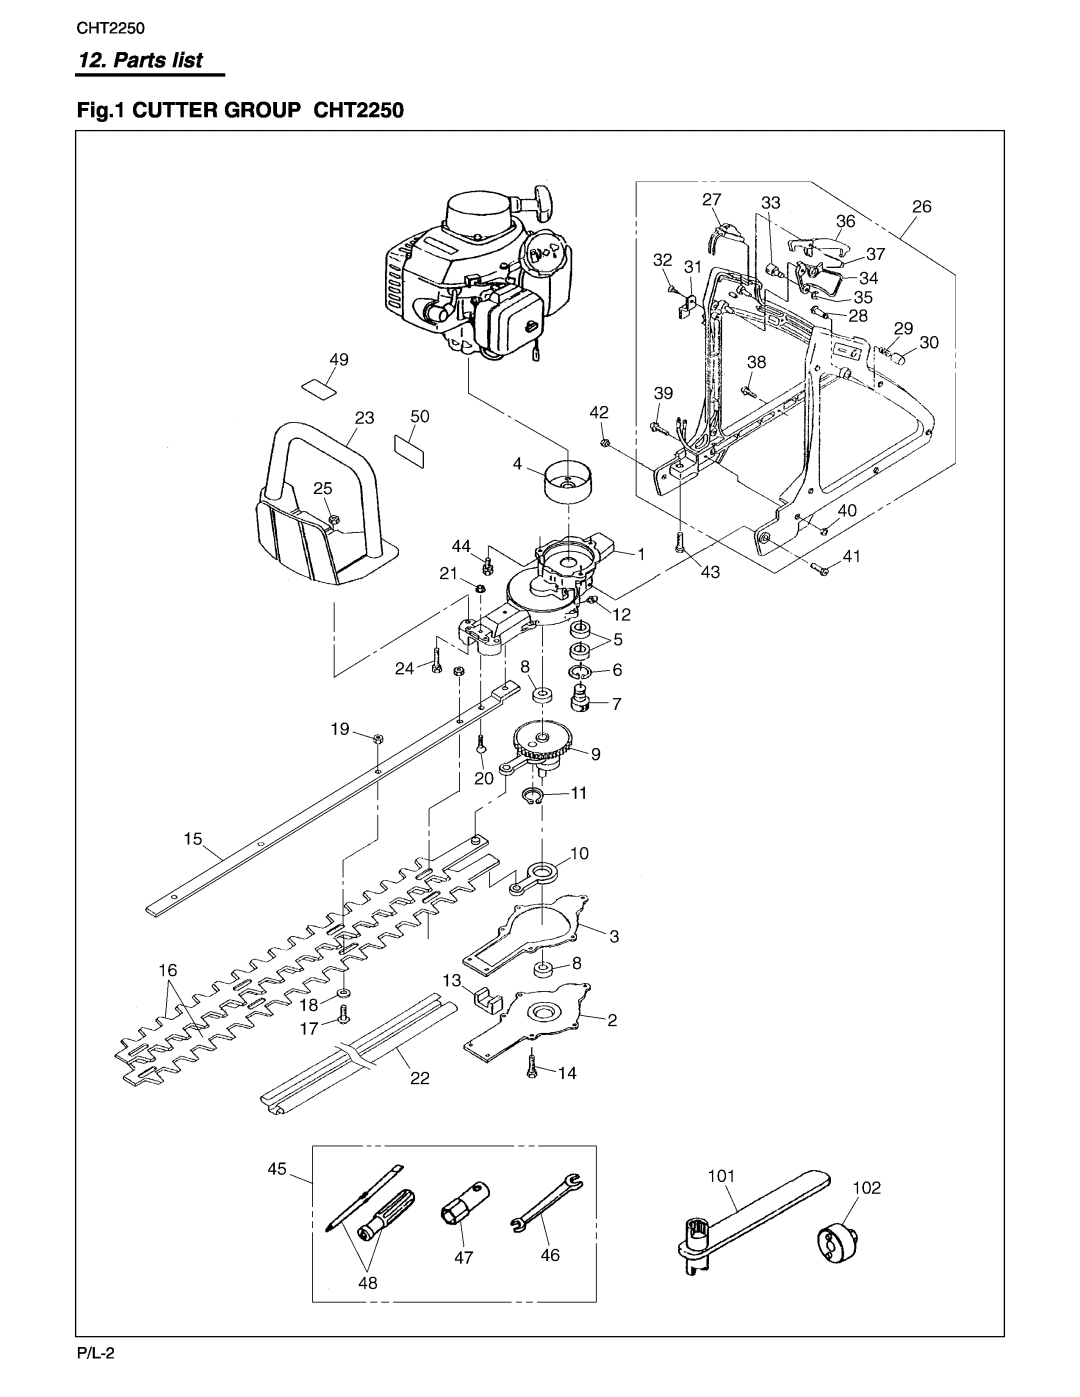 RedMax manual CUTTER GROUP CHT2250, Parts list 